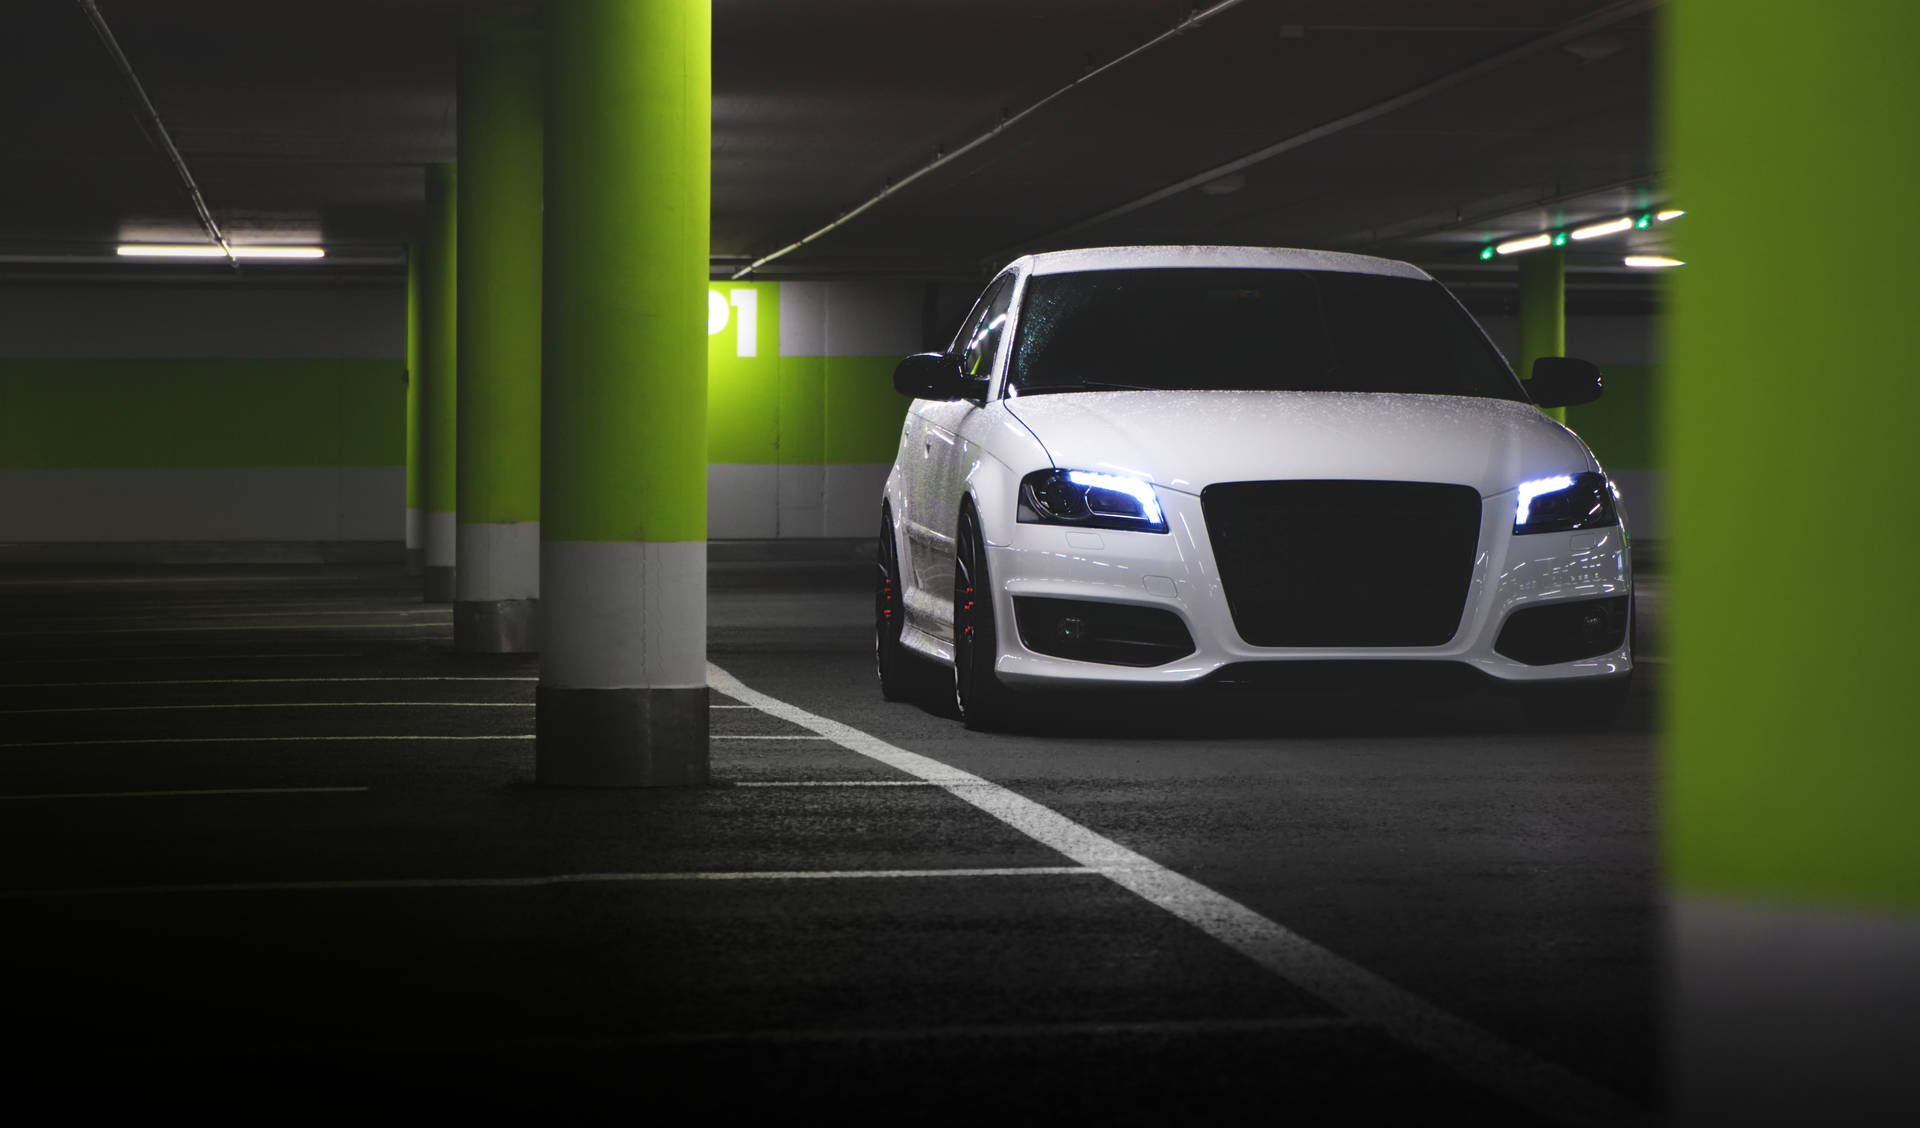 White Audi In Neon Parking Lot Background